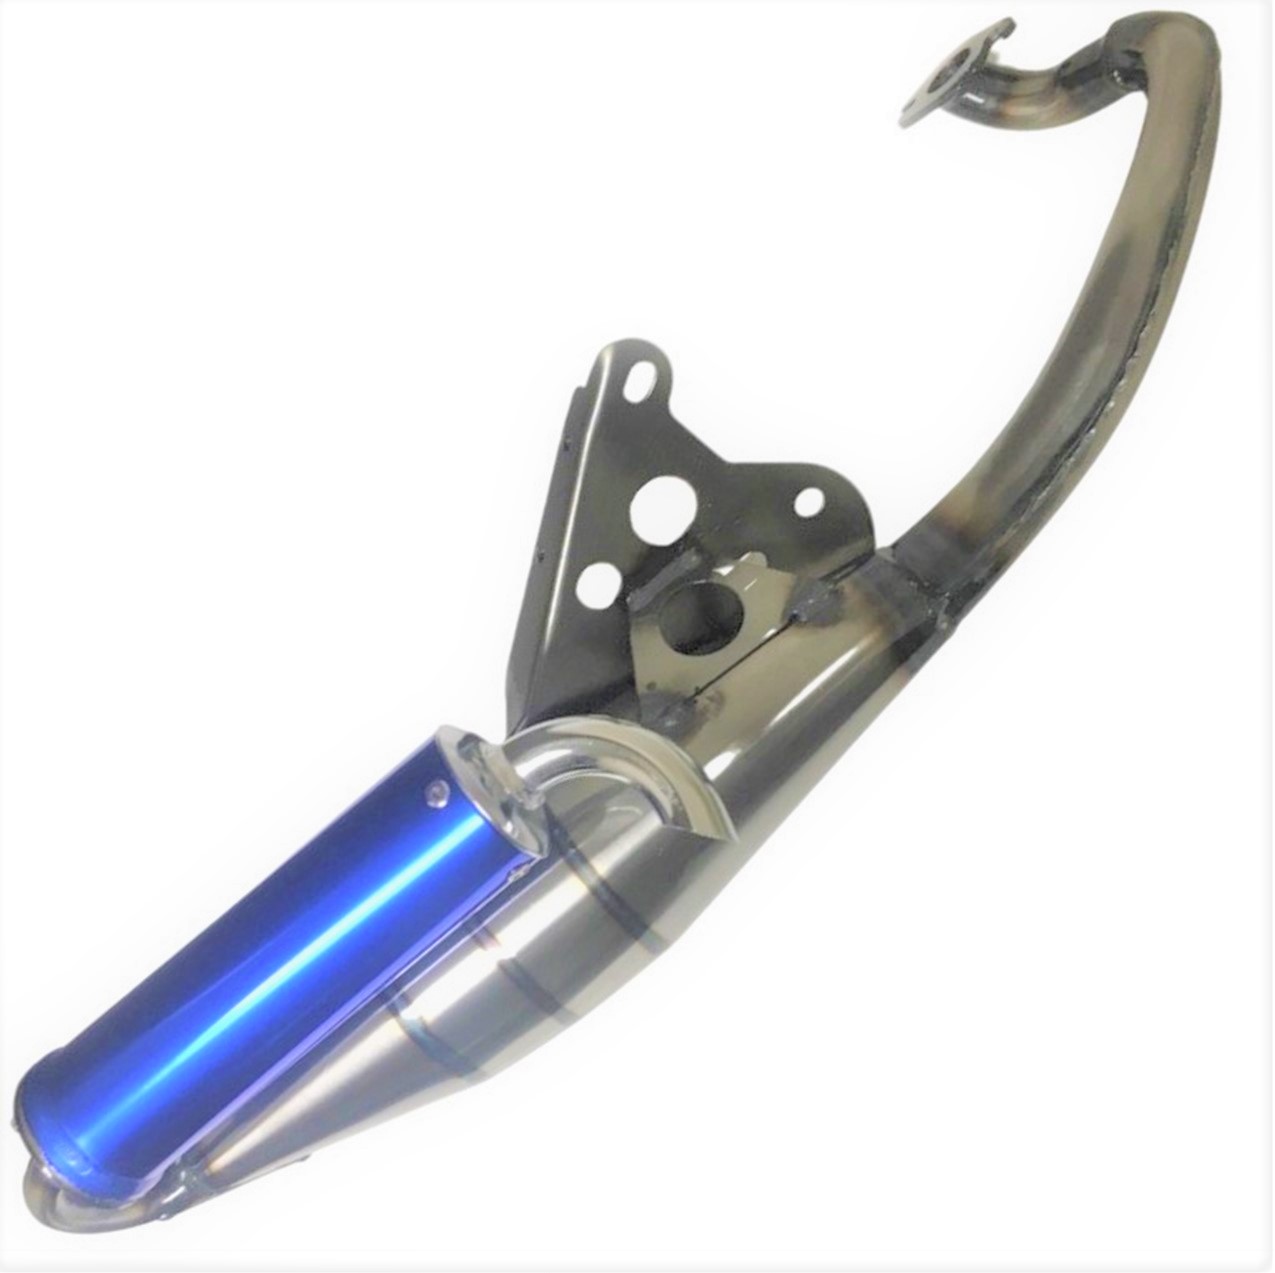 High Performance 2 Stroke Exhaust Fits Most Eton, Vento, Jog, Kymco, 50cc Scooters with the Minarelli - Jog Type Engine. Fits many other brands as well. - Click Image to Close